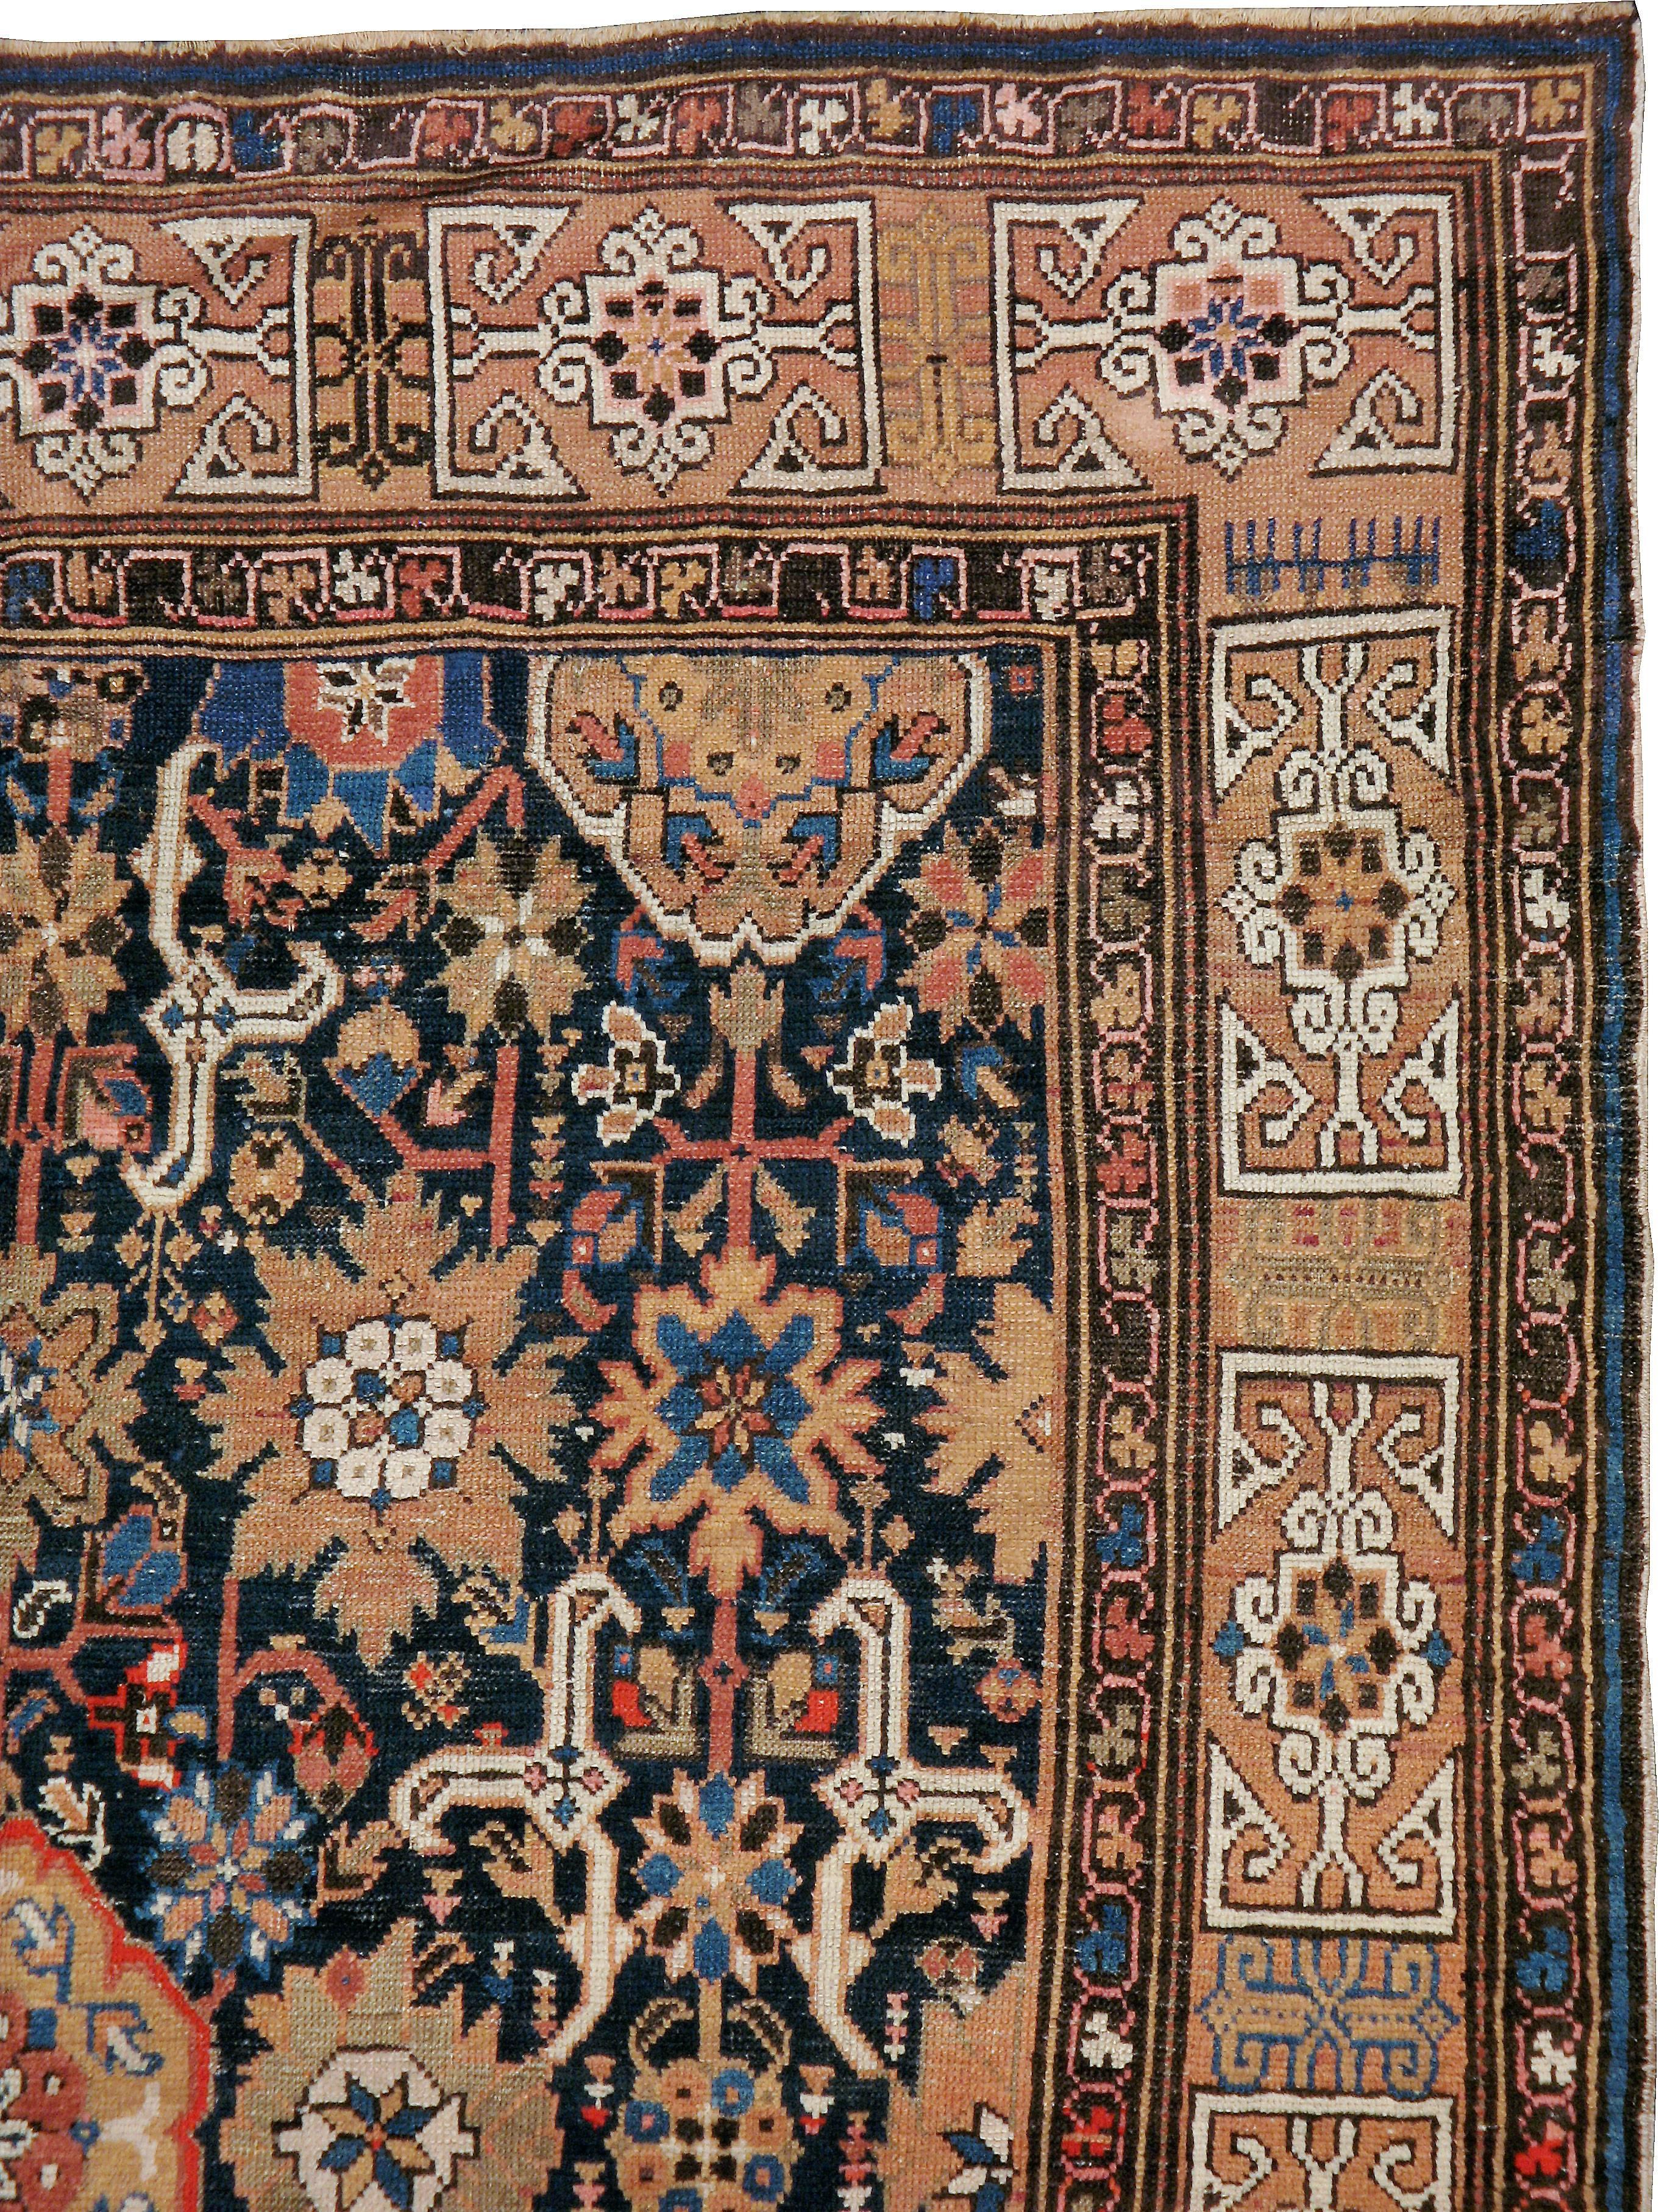 Early 20th Century Anitque Persian North West Rug